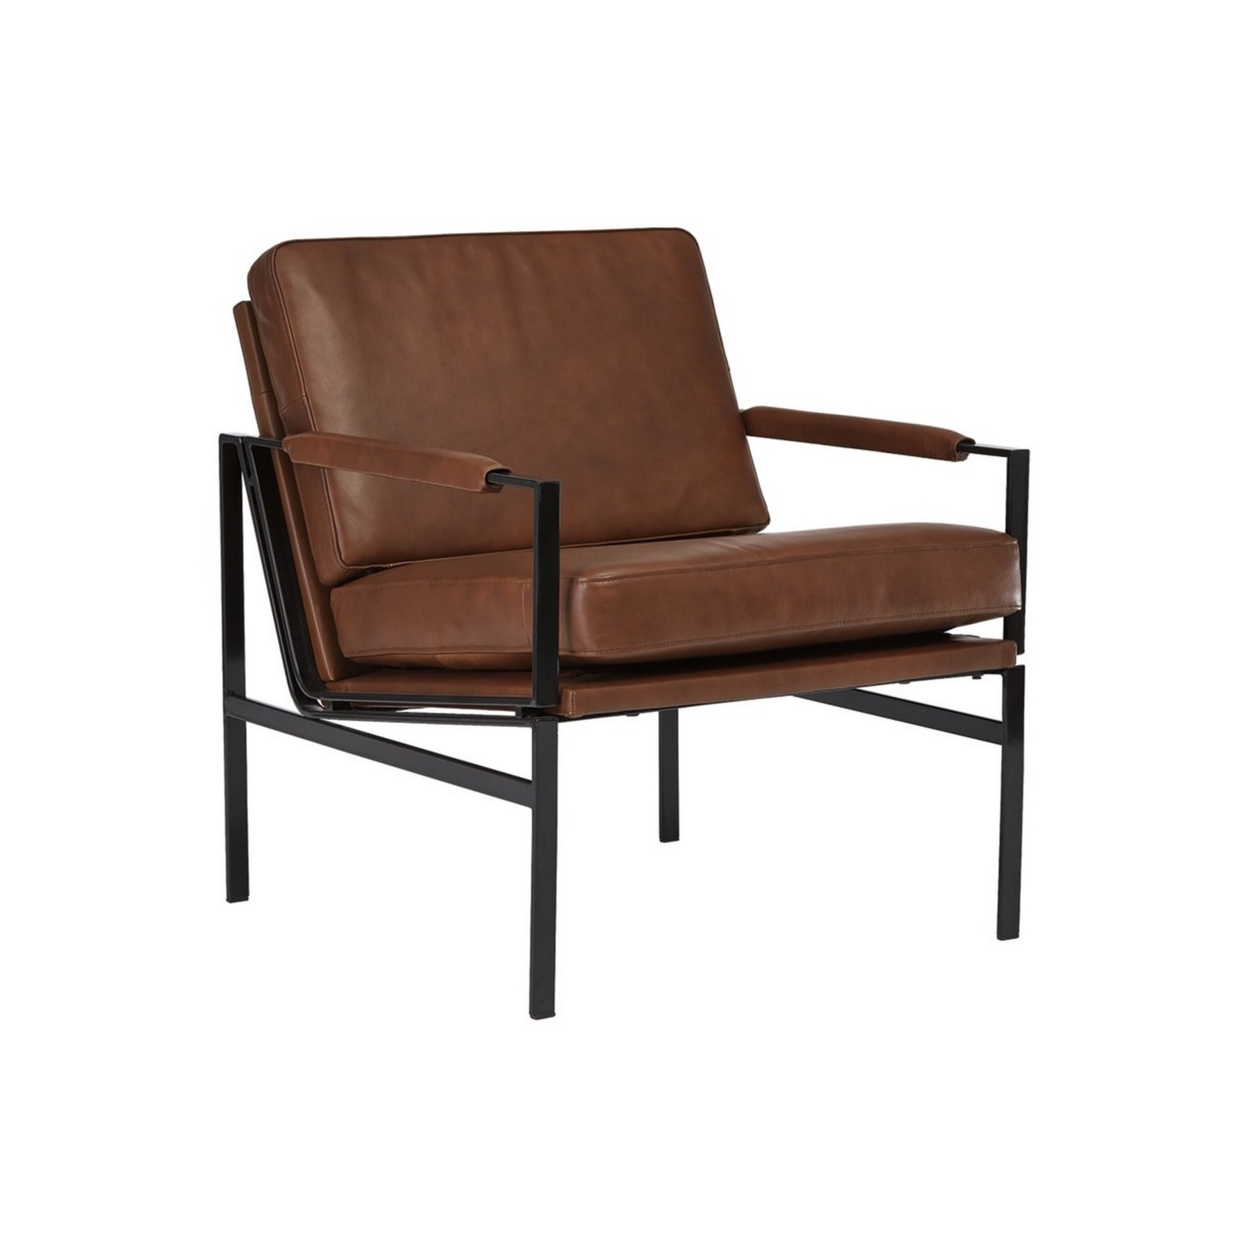 Metal Frame Accent Chair With Leatherette Seat And Back, Brown And Black- Saltoro Sherpi